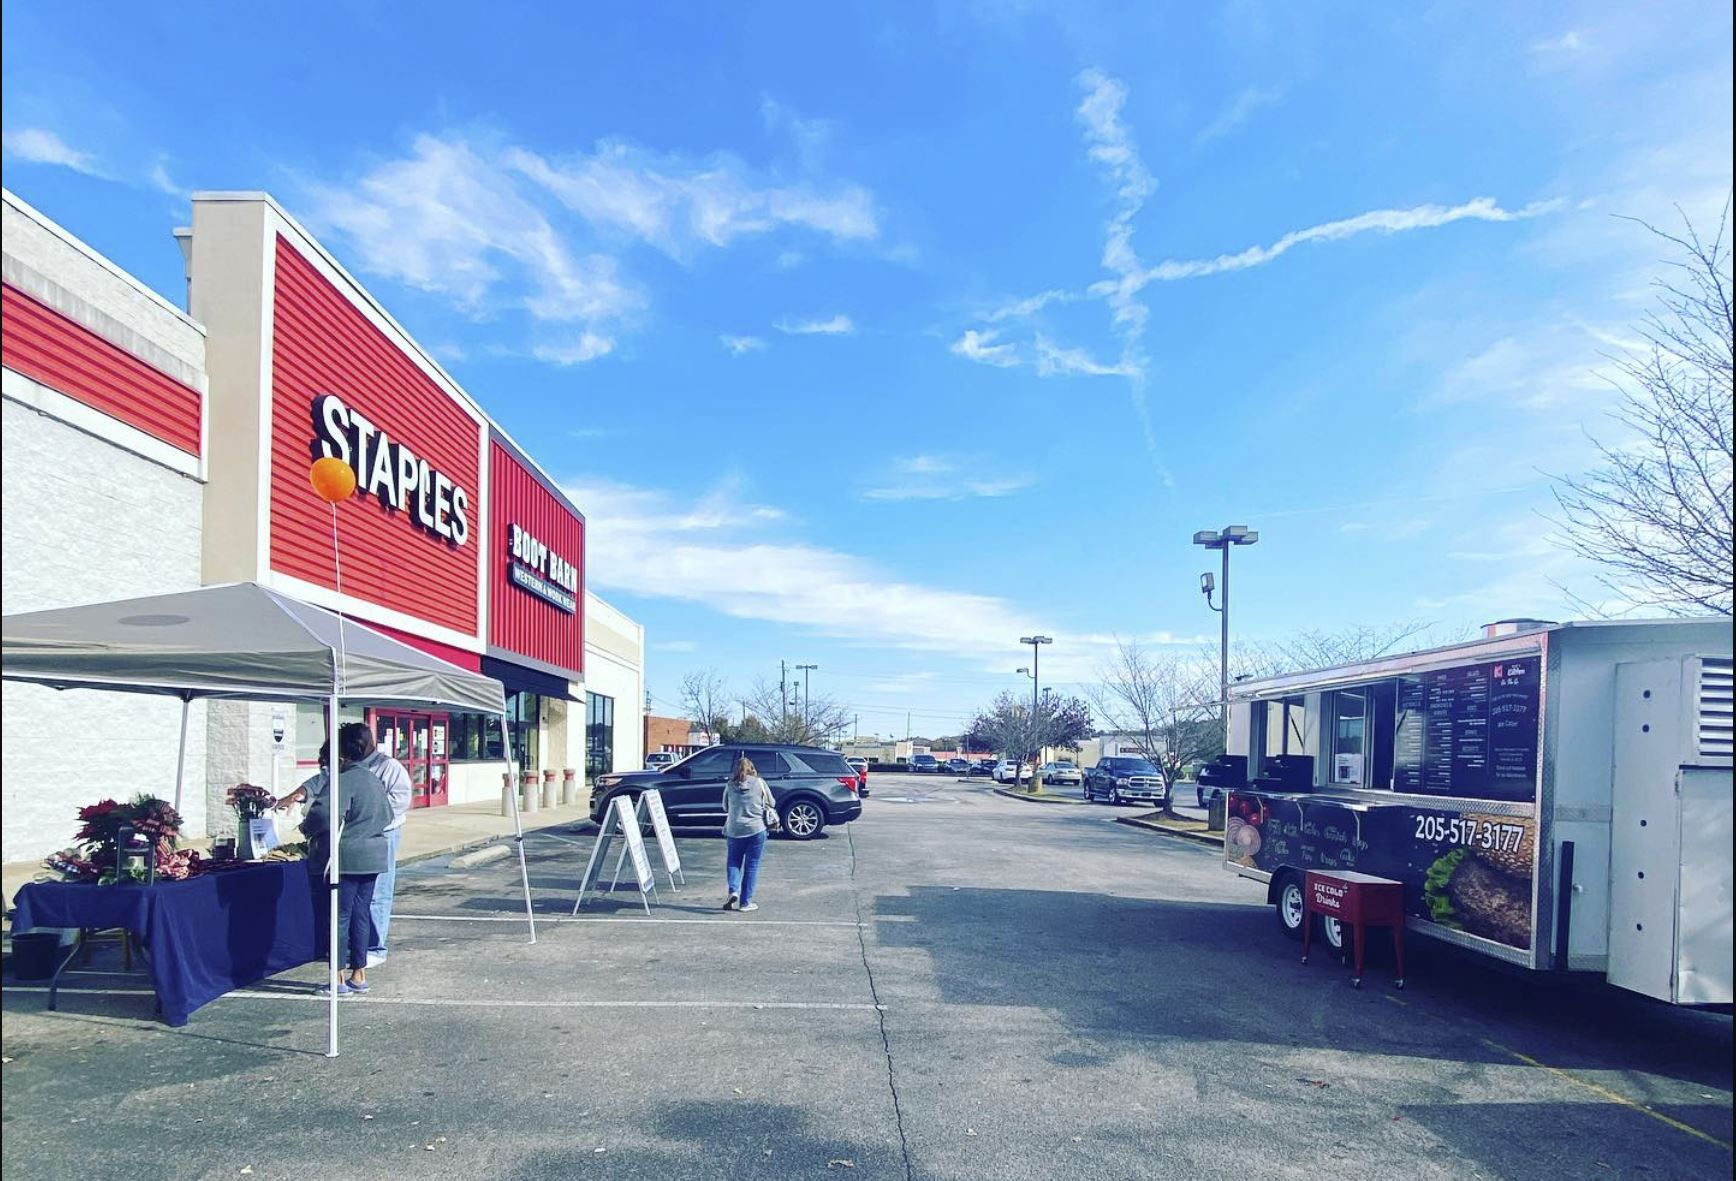 Staples celebrates Small Business Saturday by hosting Trussville businesses